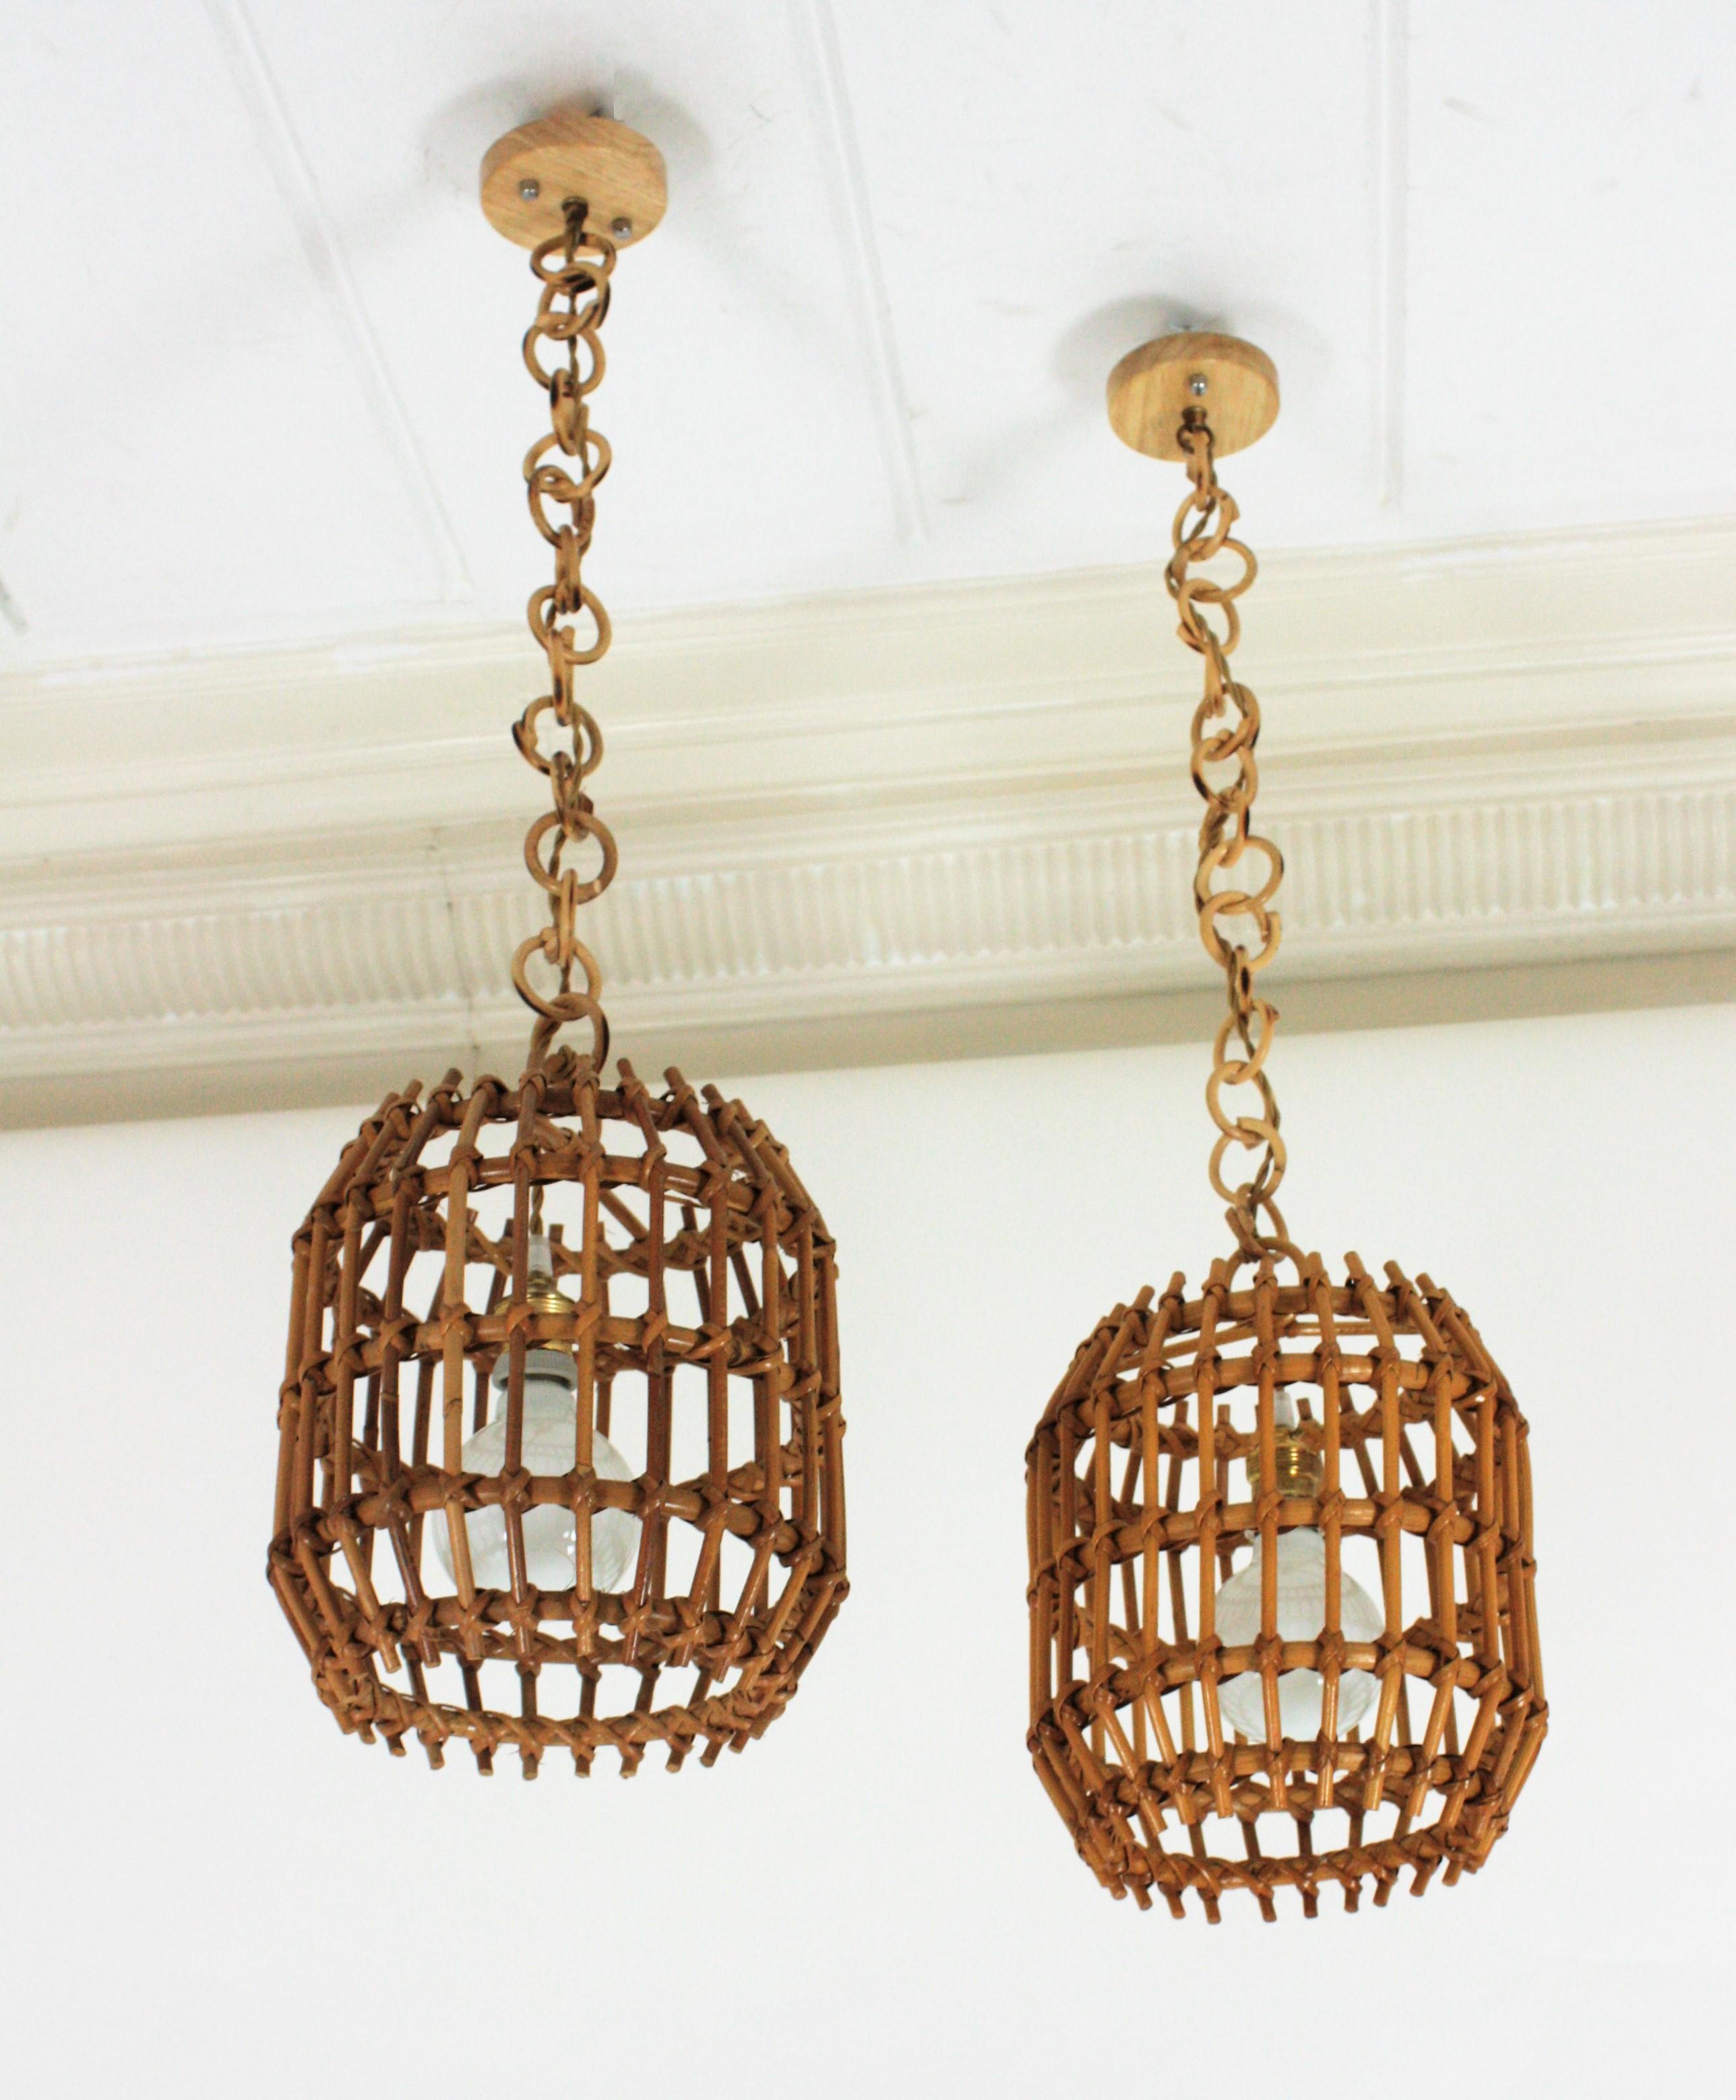 Pair of Rattan Pendant Lights or Lanterns, 1960s For Sale 6